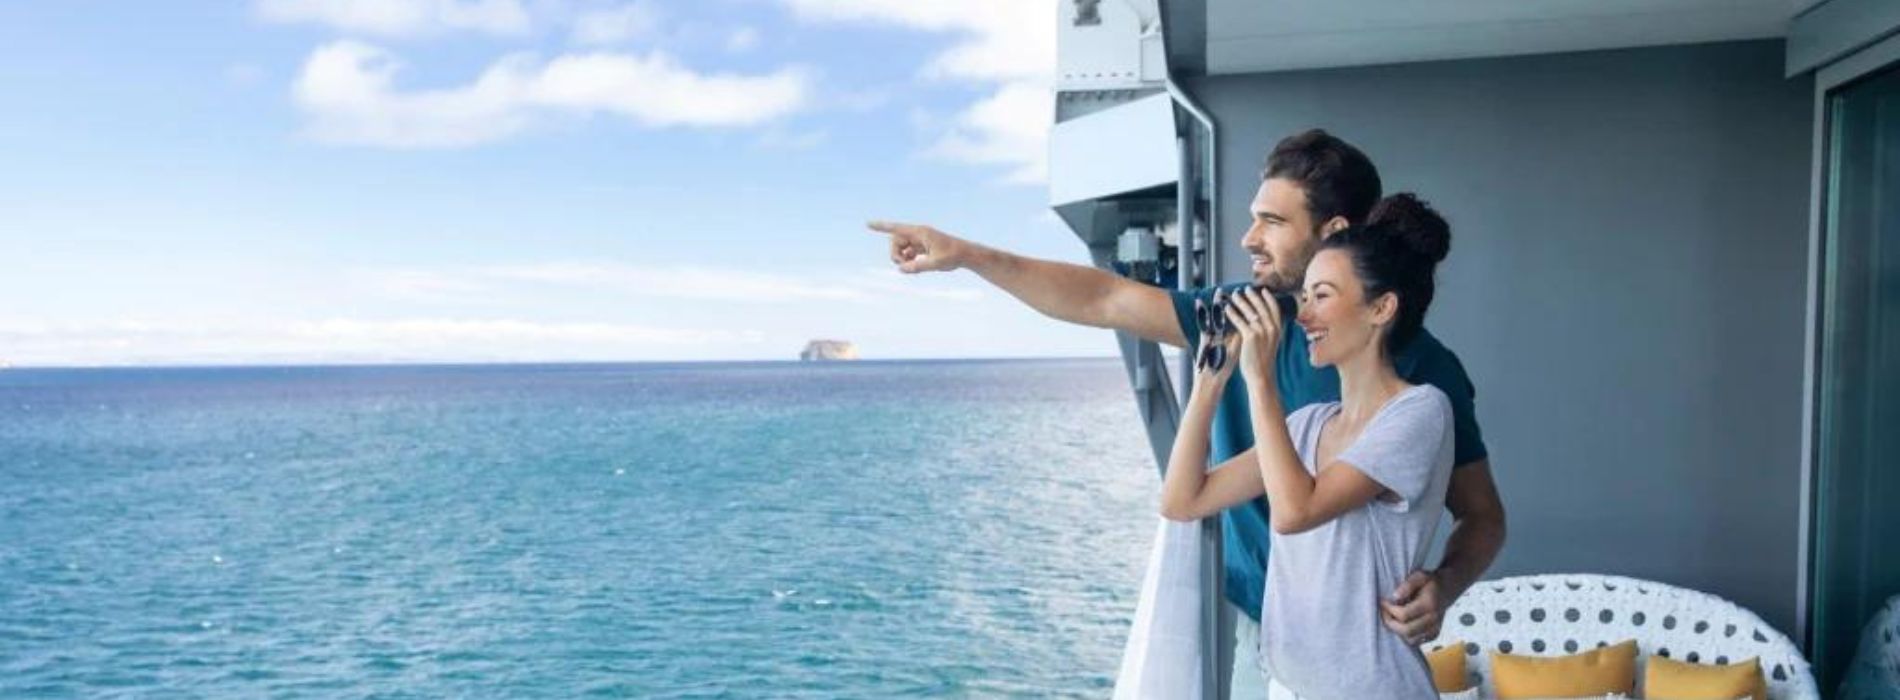 What to wear when boarding a cruise ship? - Madeinsea©